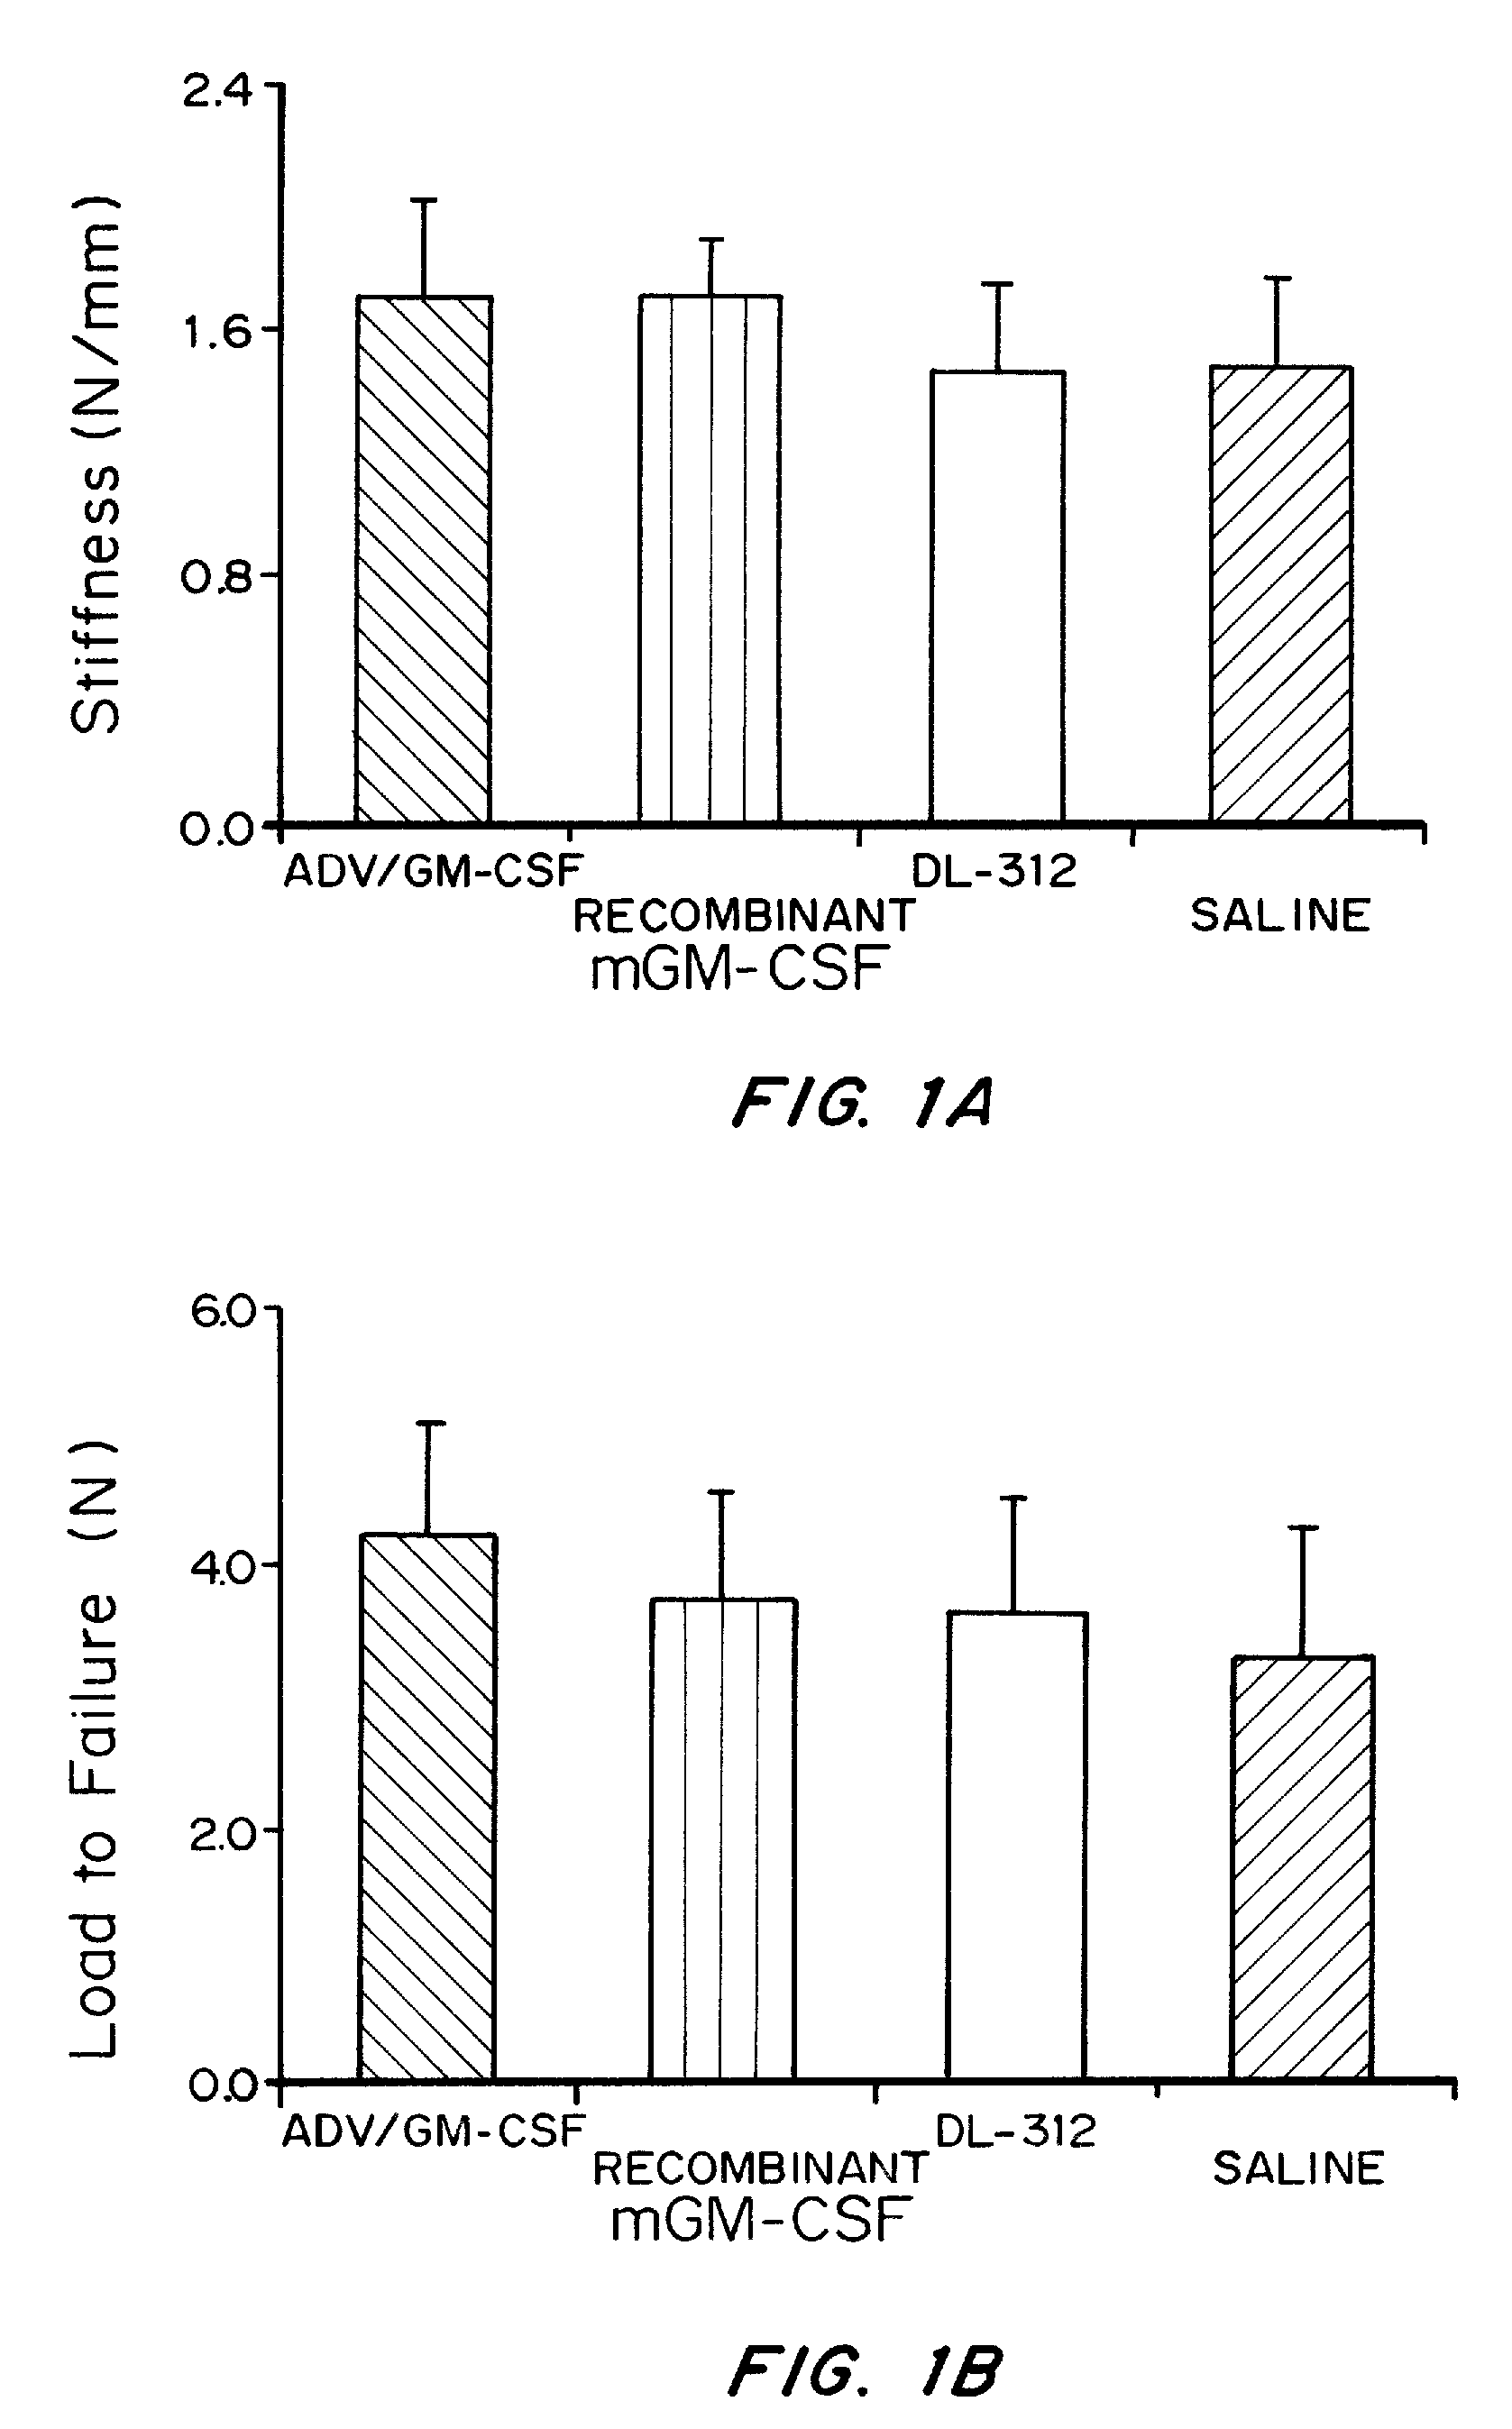 Gm-csf cosmeceutical compositions and methods of use thereof